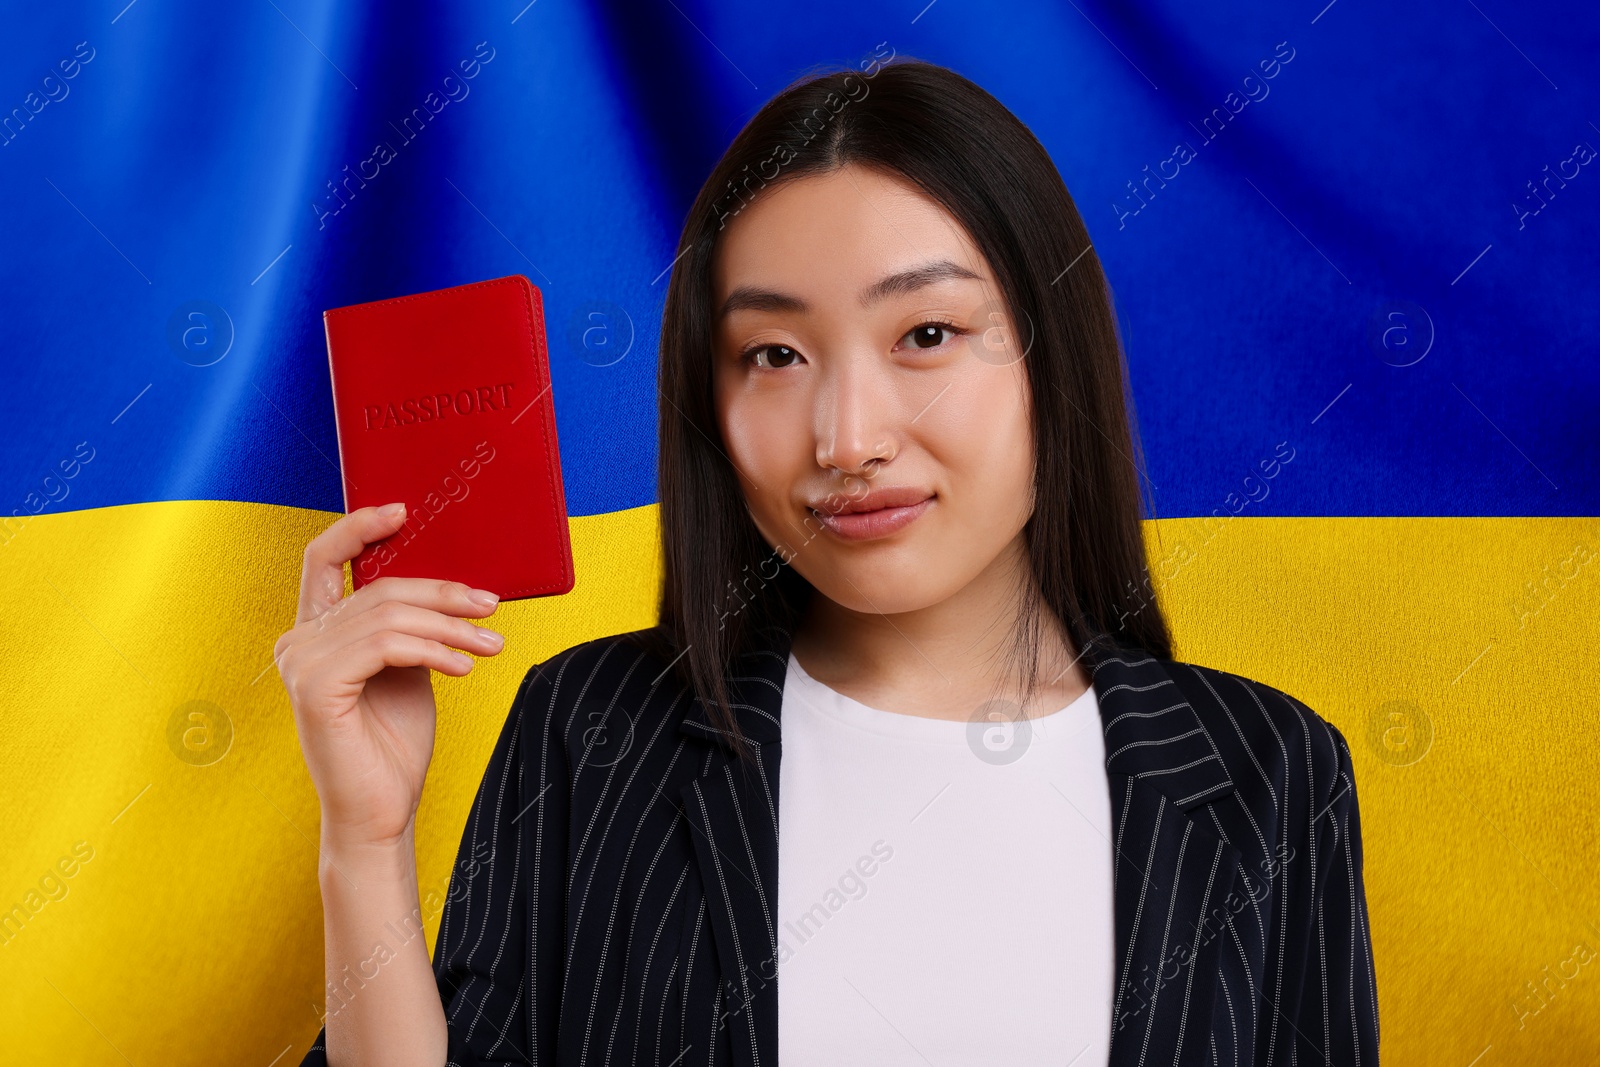 Image of Immigration. Woman with passport against national flag of Ukraine